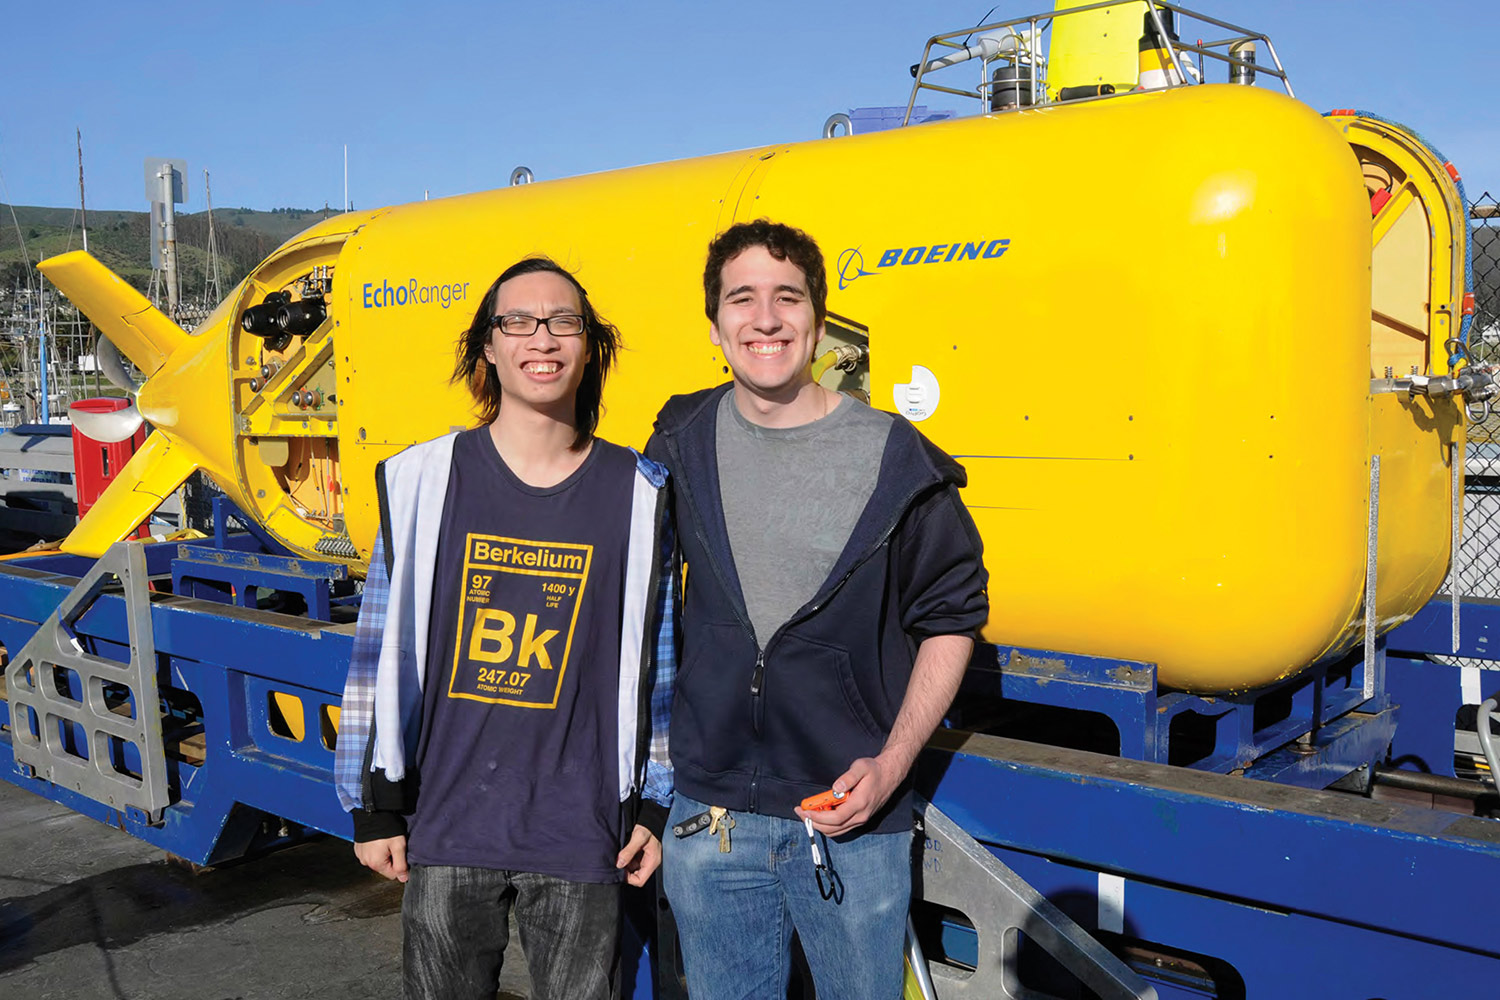 Nuclear engineering alum and student pose in front of submersible used to find the sunken USS Independence